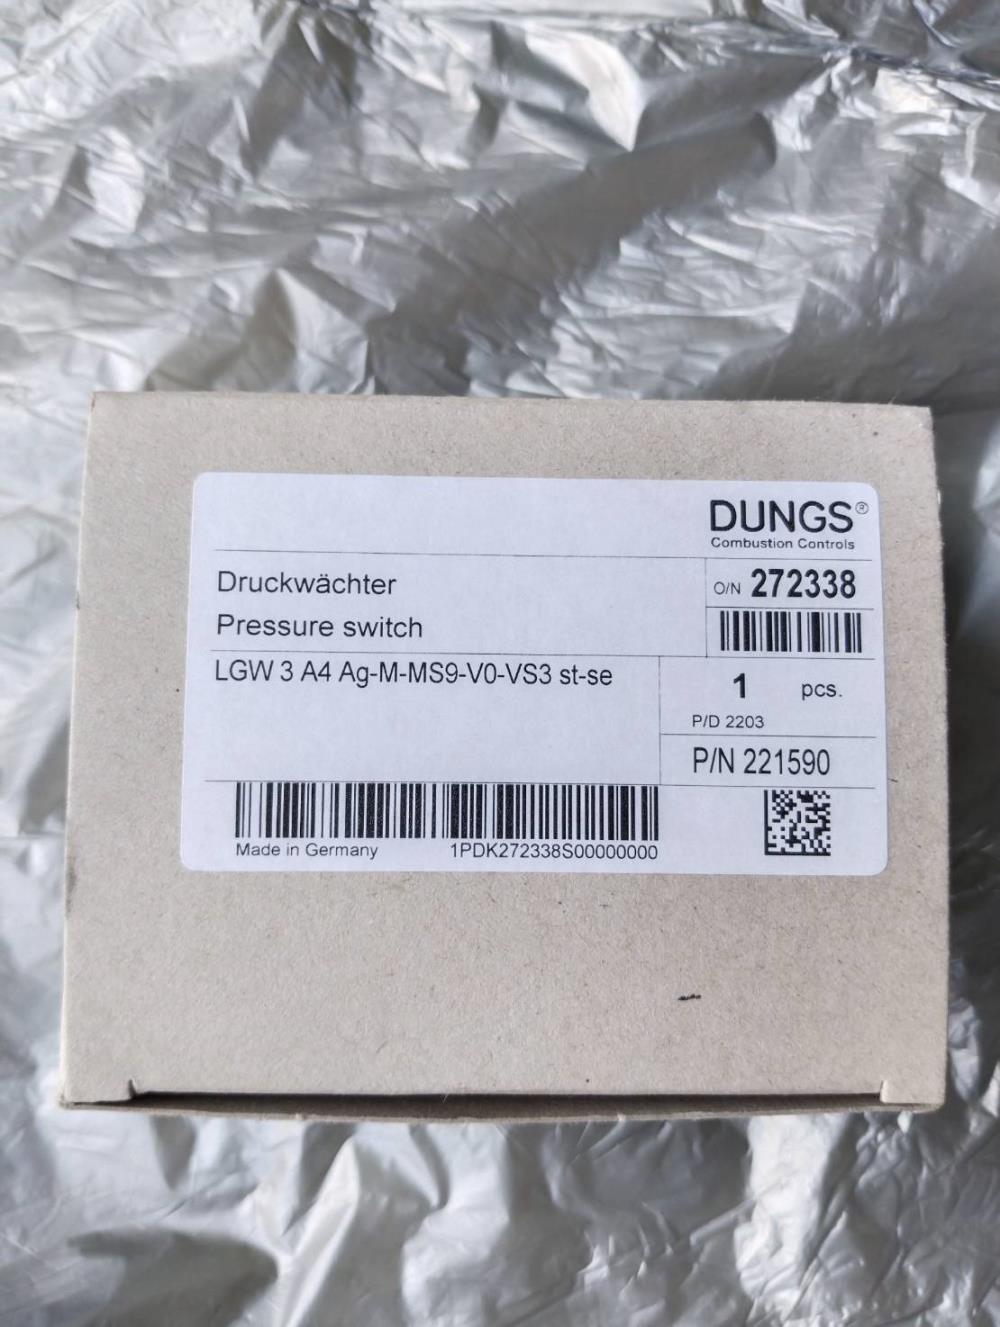 "DUNGS" Pressure Switch LGW 3 A4